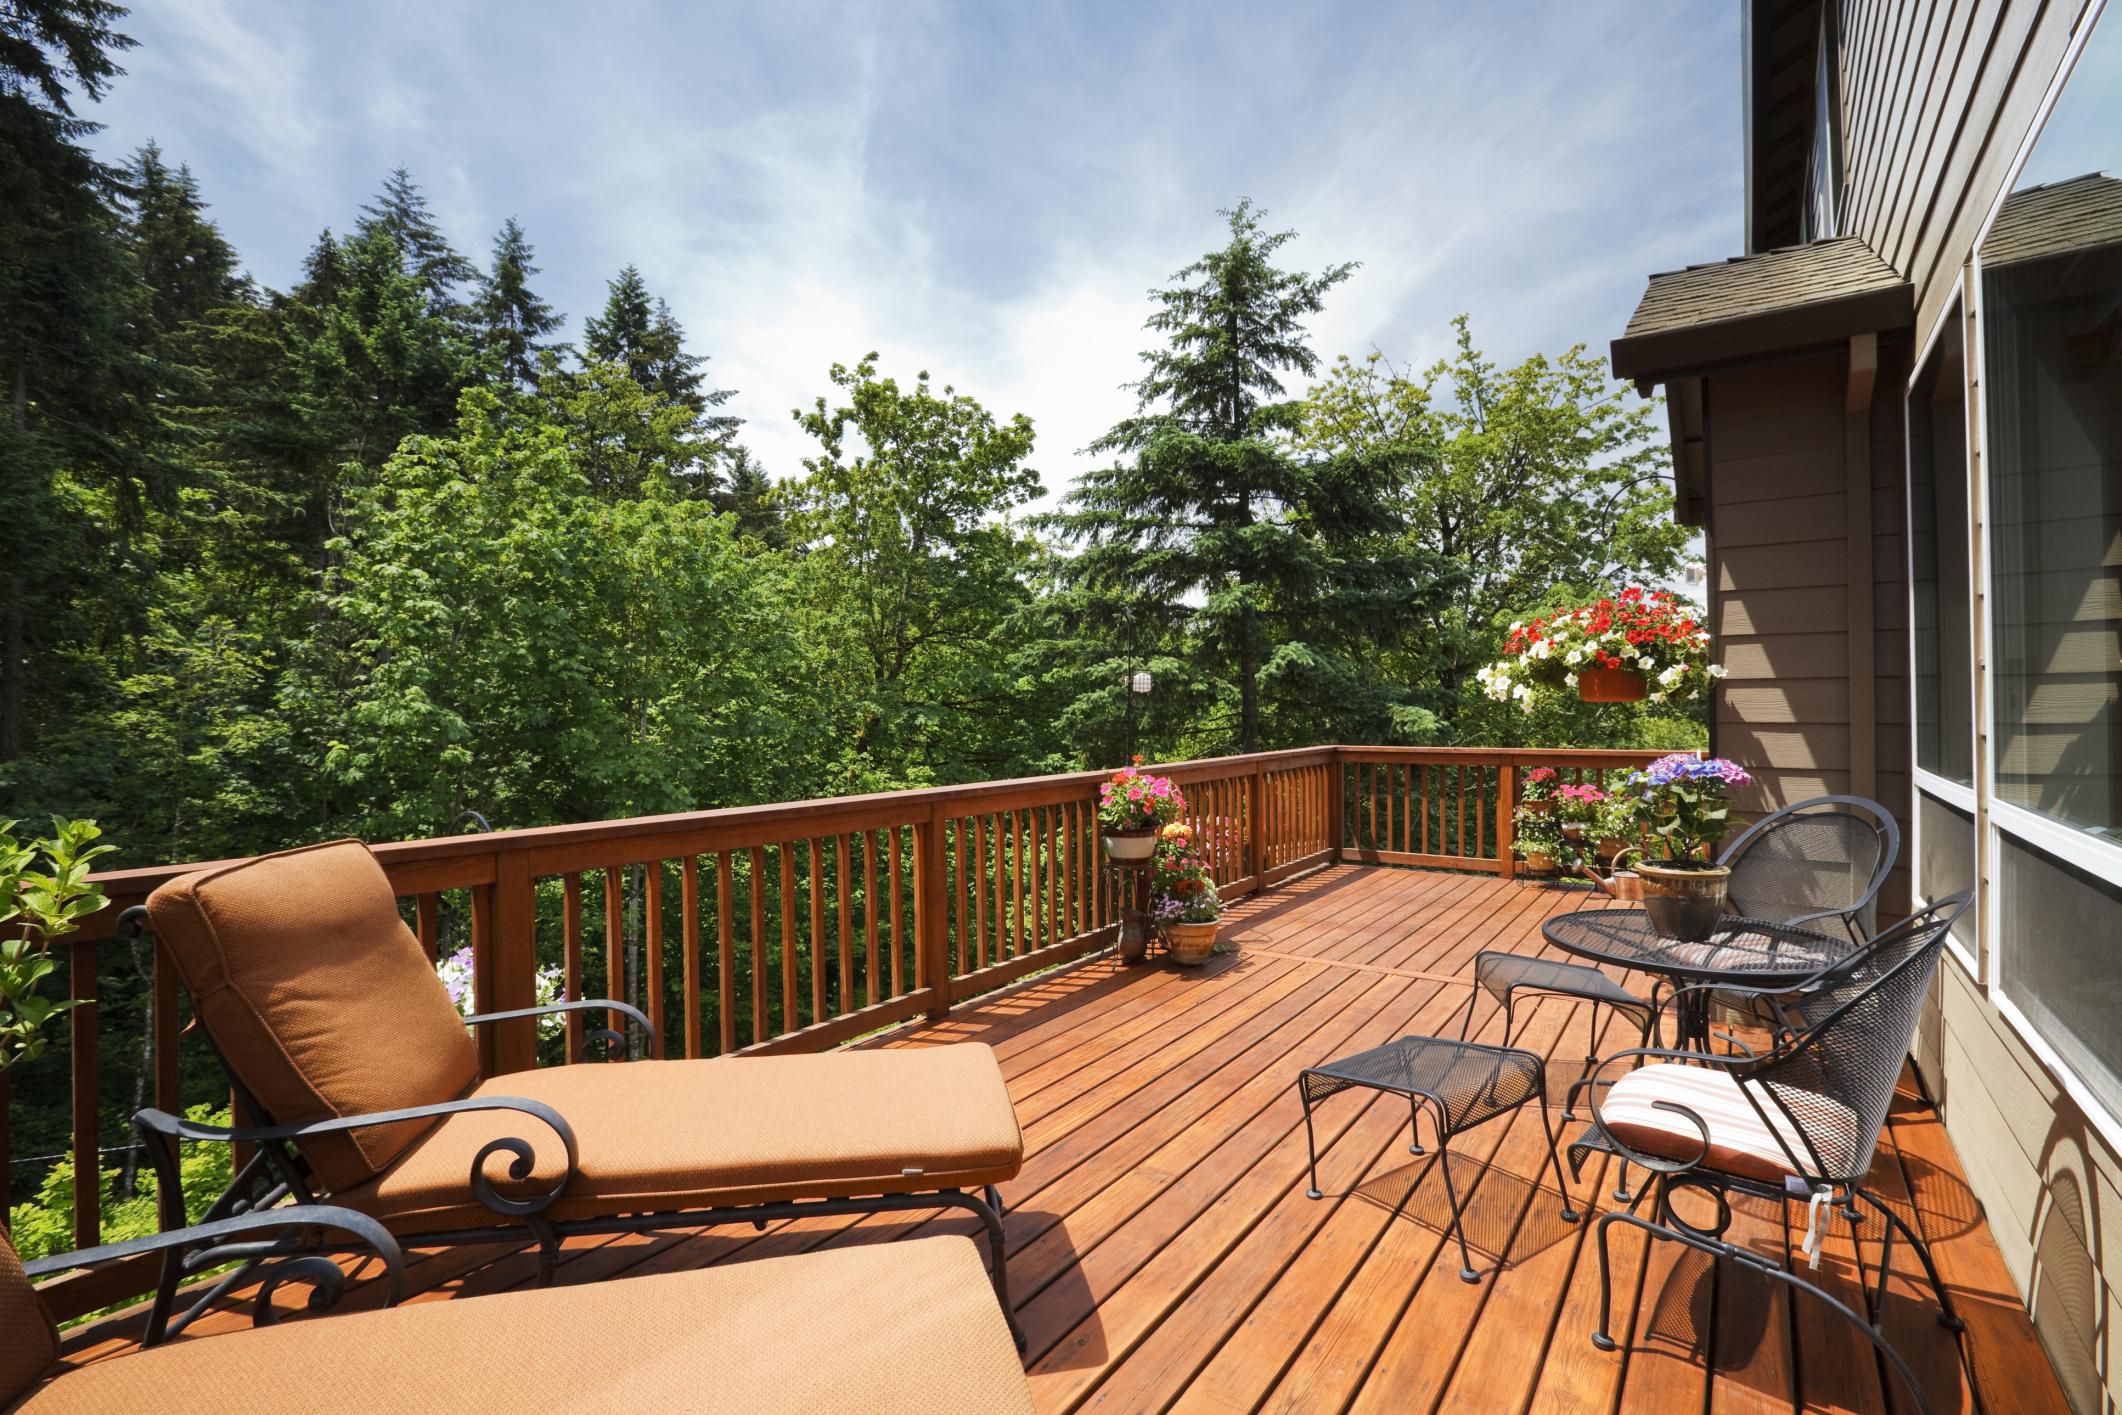 Building Code Guidelines: Decking Railing Heights, Guards ...